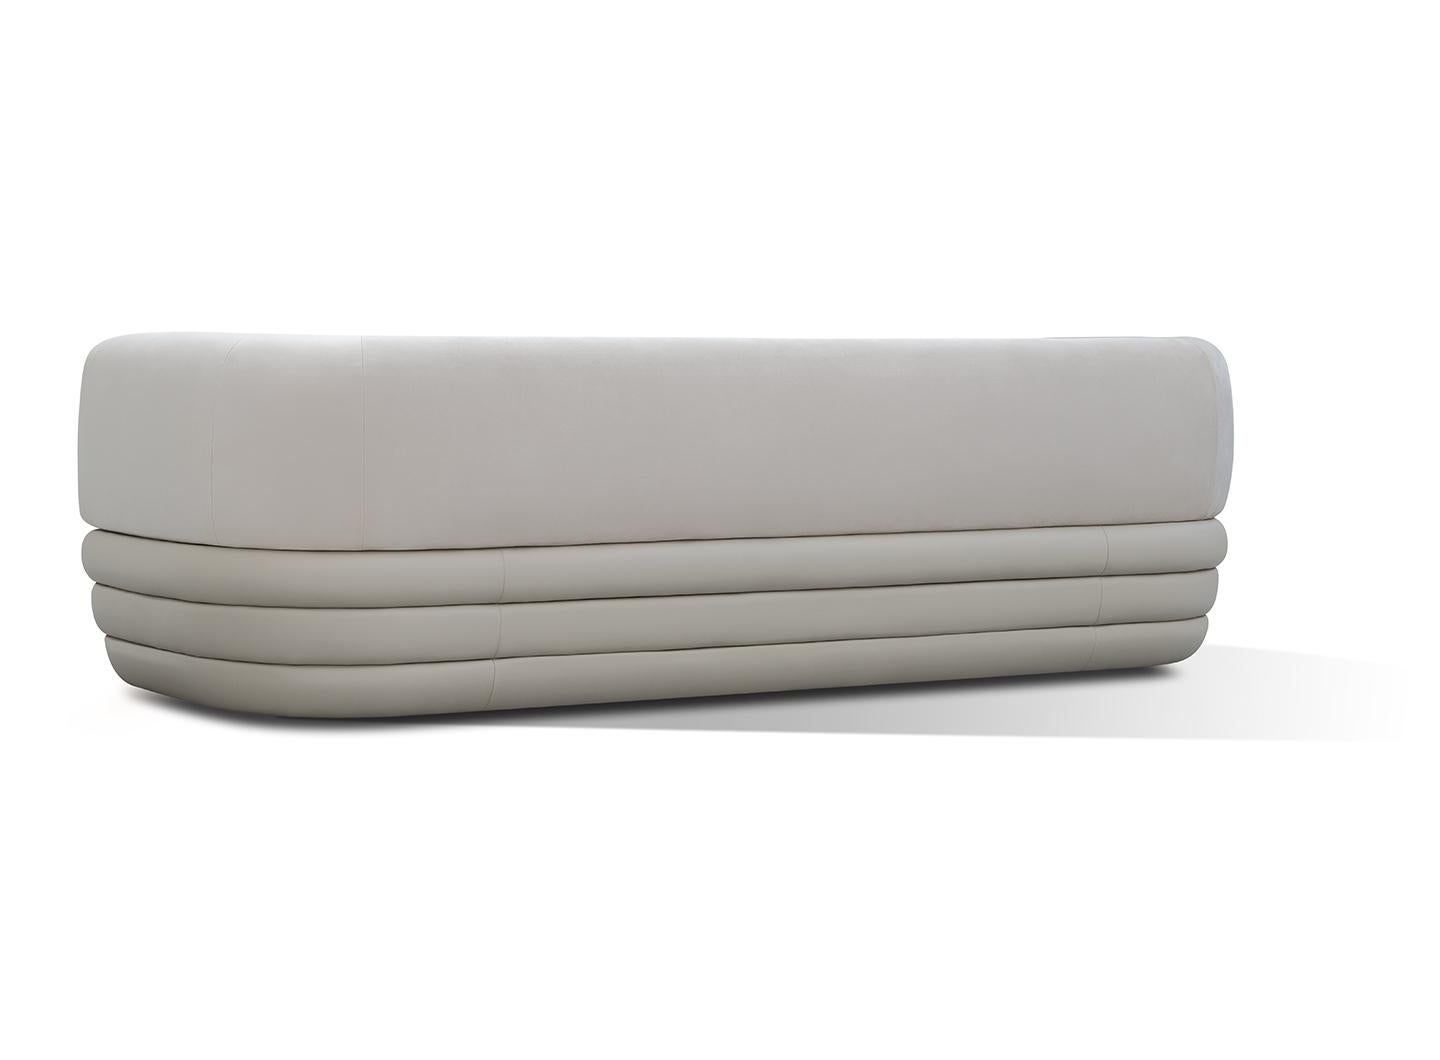 Three seater sofa characterized by a soft backrest perfectly shaped that hugs you and enhances the comfort.
The base is enriched by three separate pieces going all around the armchair to create an unique piece, making it more stylish and perfect